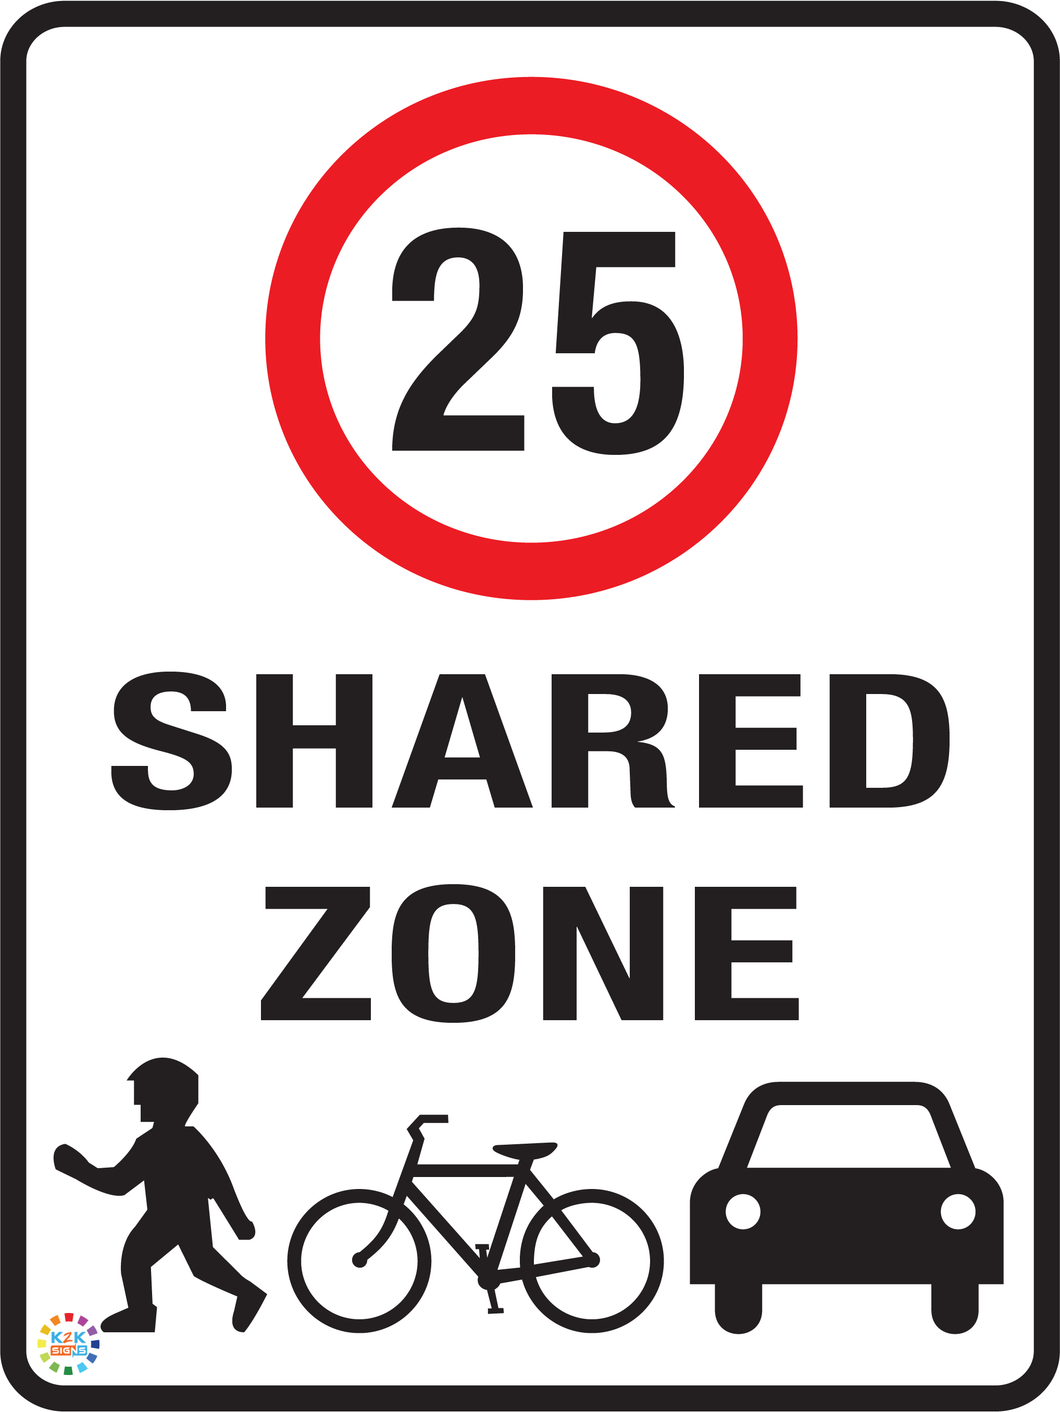 Shared Zone - Speed Limit 25 Kph Sign